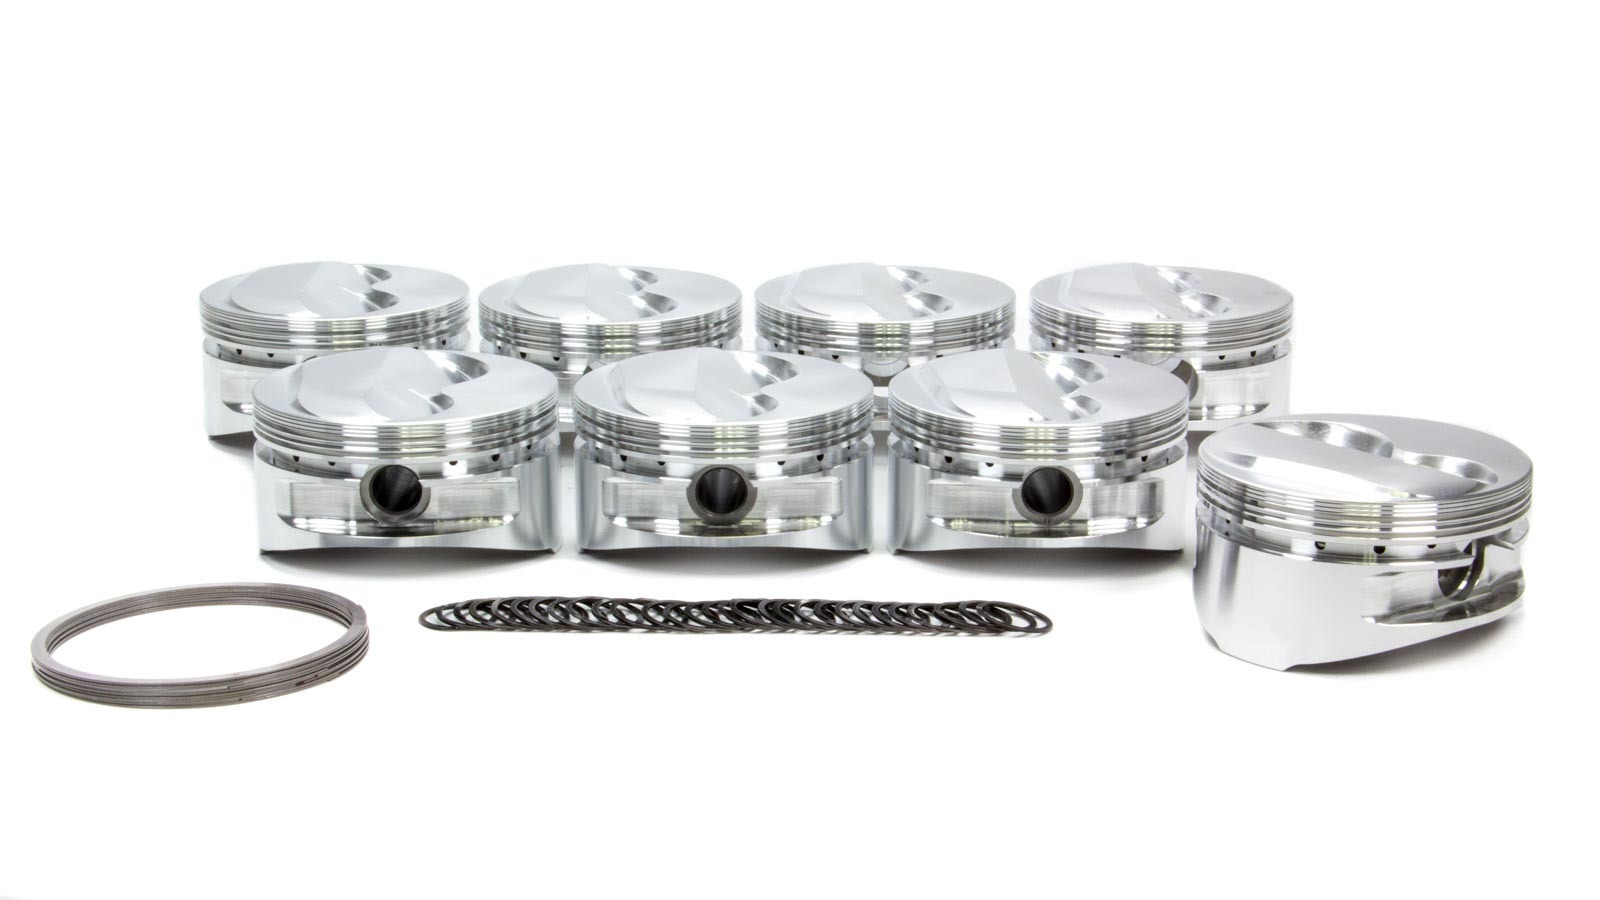 JE Pistons 182035 Piston, Small Block Dome, Forged, 4.145 in Bore, 1/16 x 1/16 x 3/16 in Ring Grooves, Plus 5.60 cc, Small Block Chevy, Set of 8